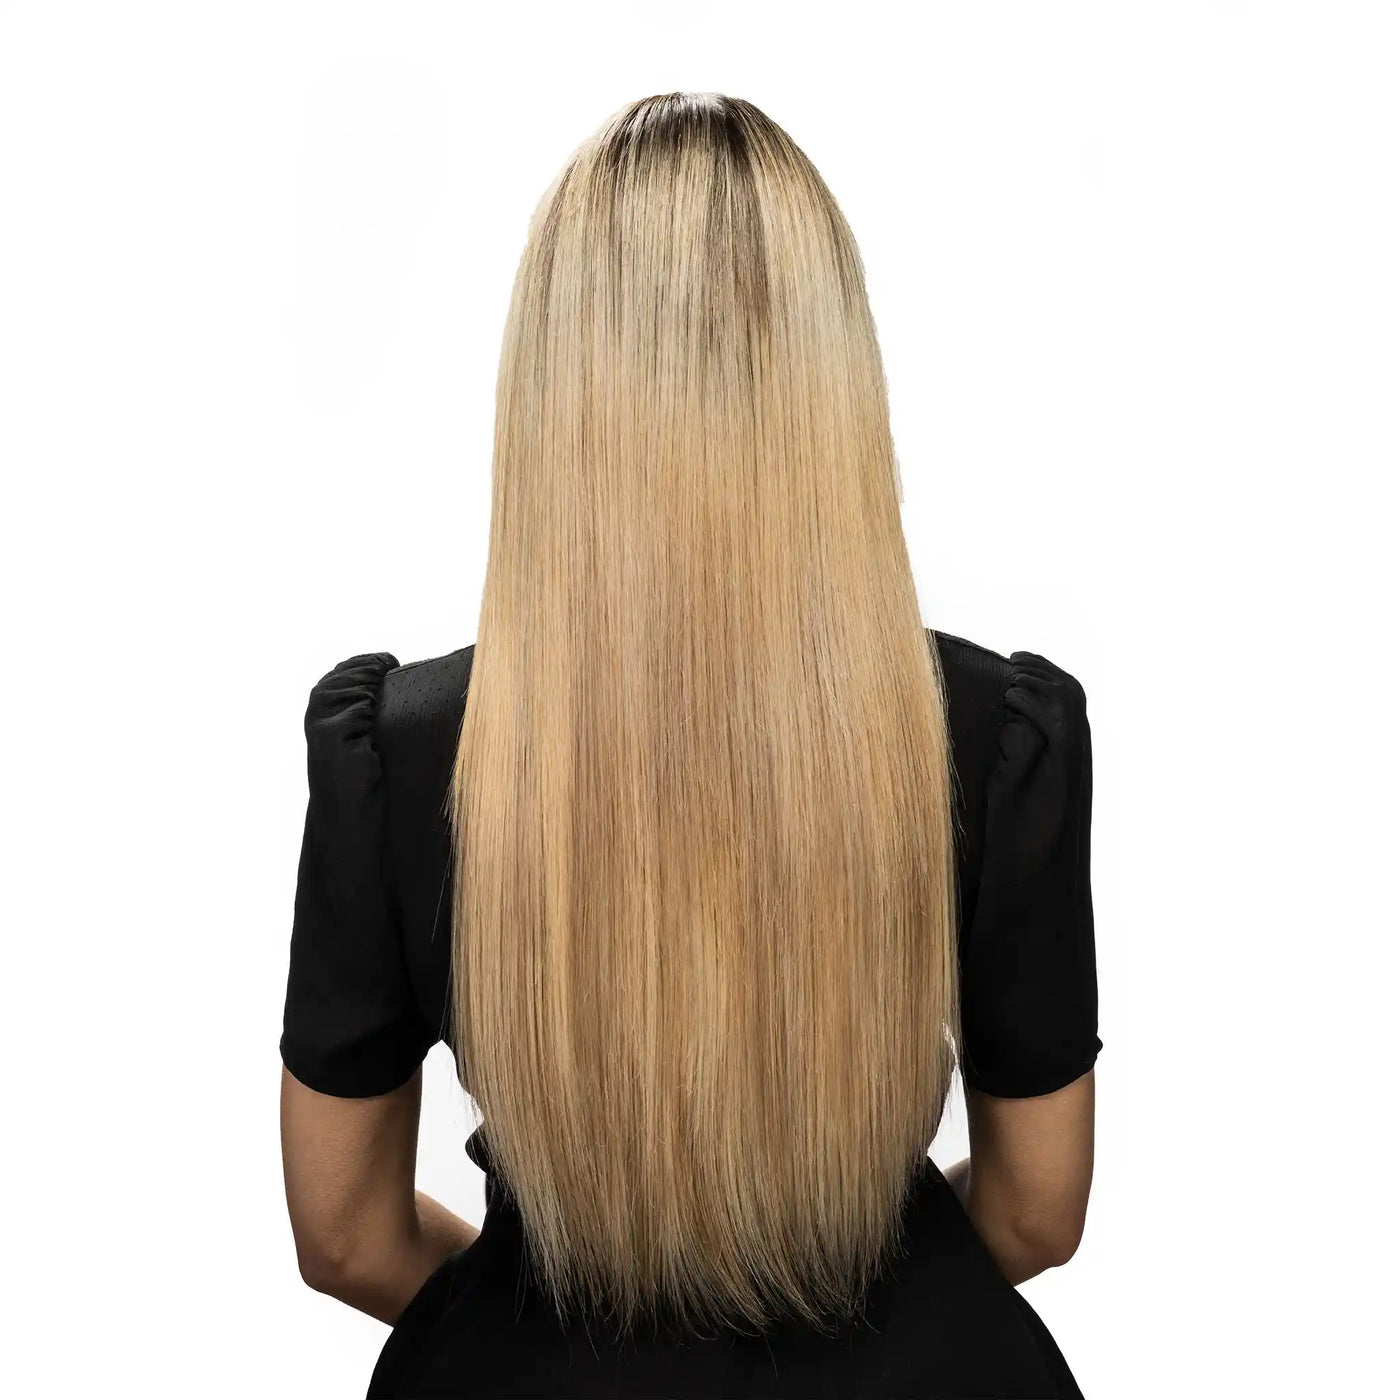 Clip in Hair Extensions Package - Free Shampoo & Paddle Brush